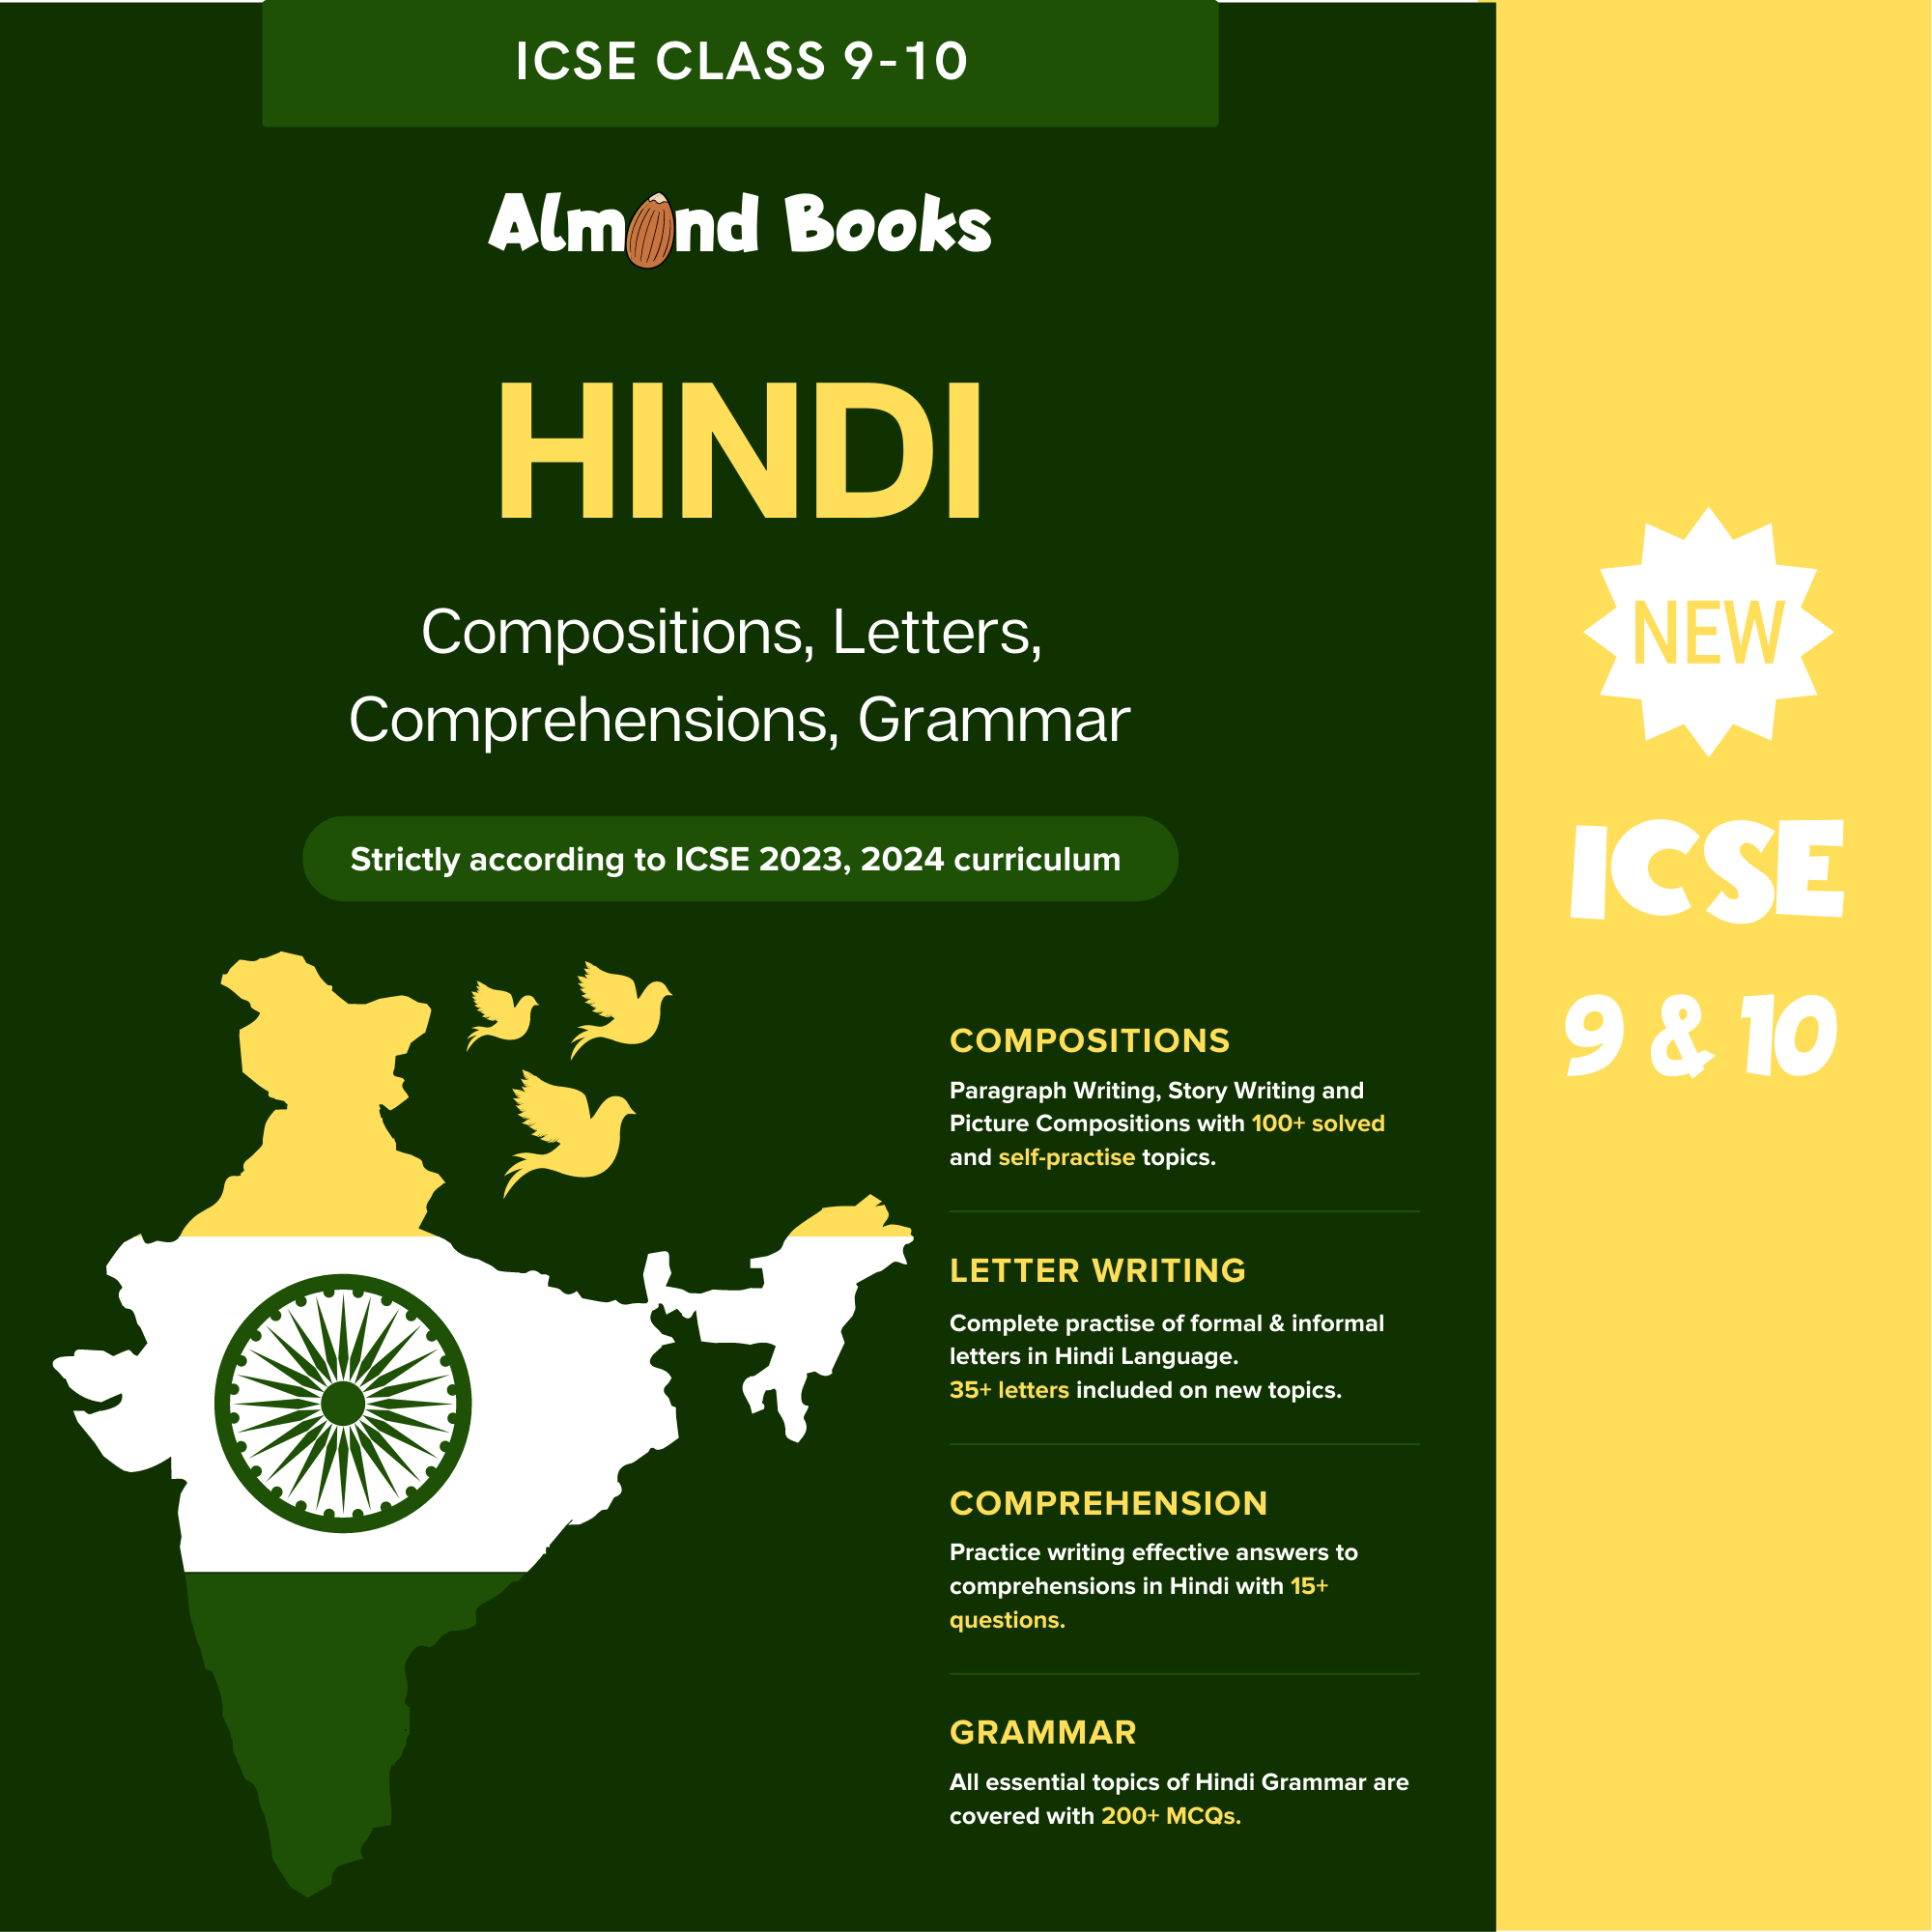 Almond Books ICSE Hindi Language (Essays, Letters, Comprehensions, Grammar) Guide for Class 9 & 10